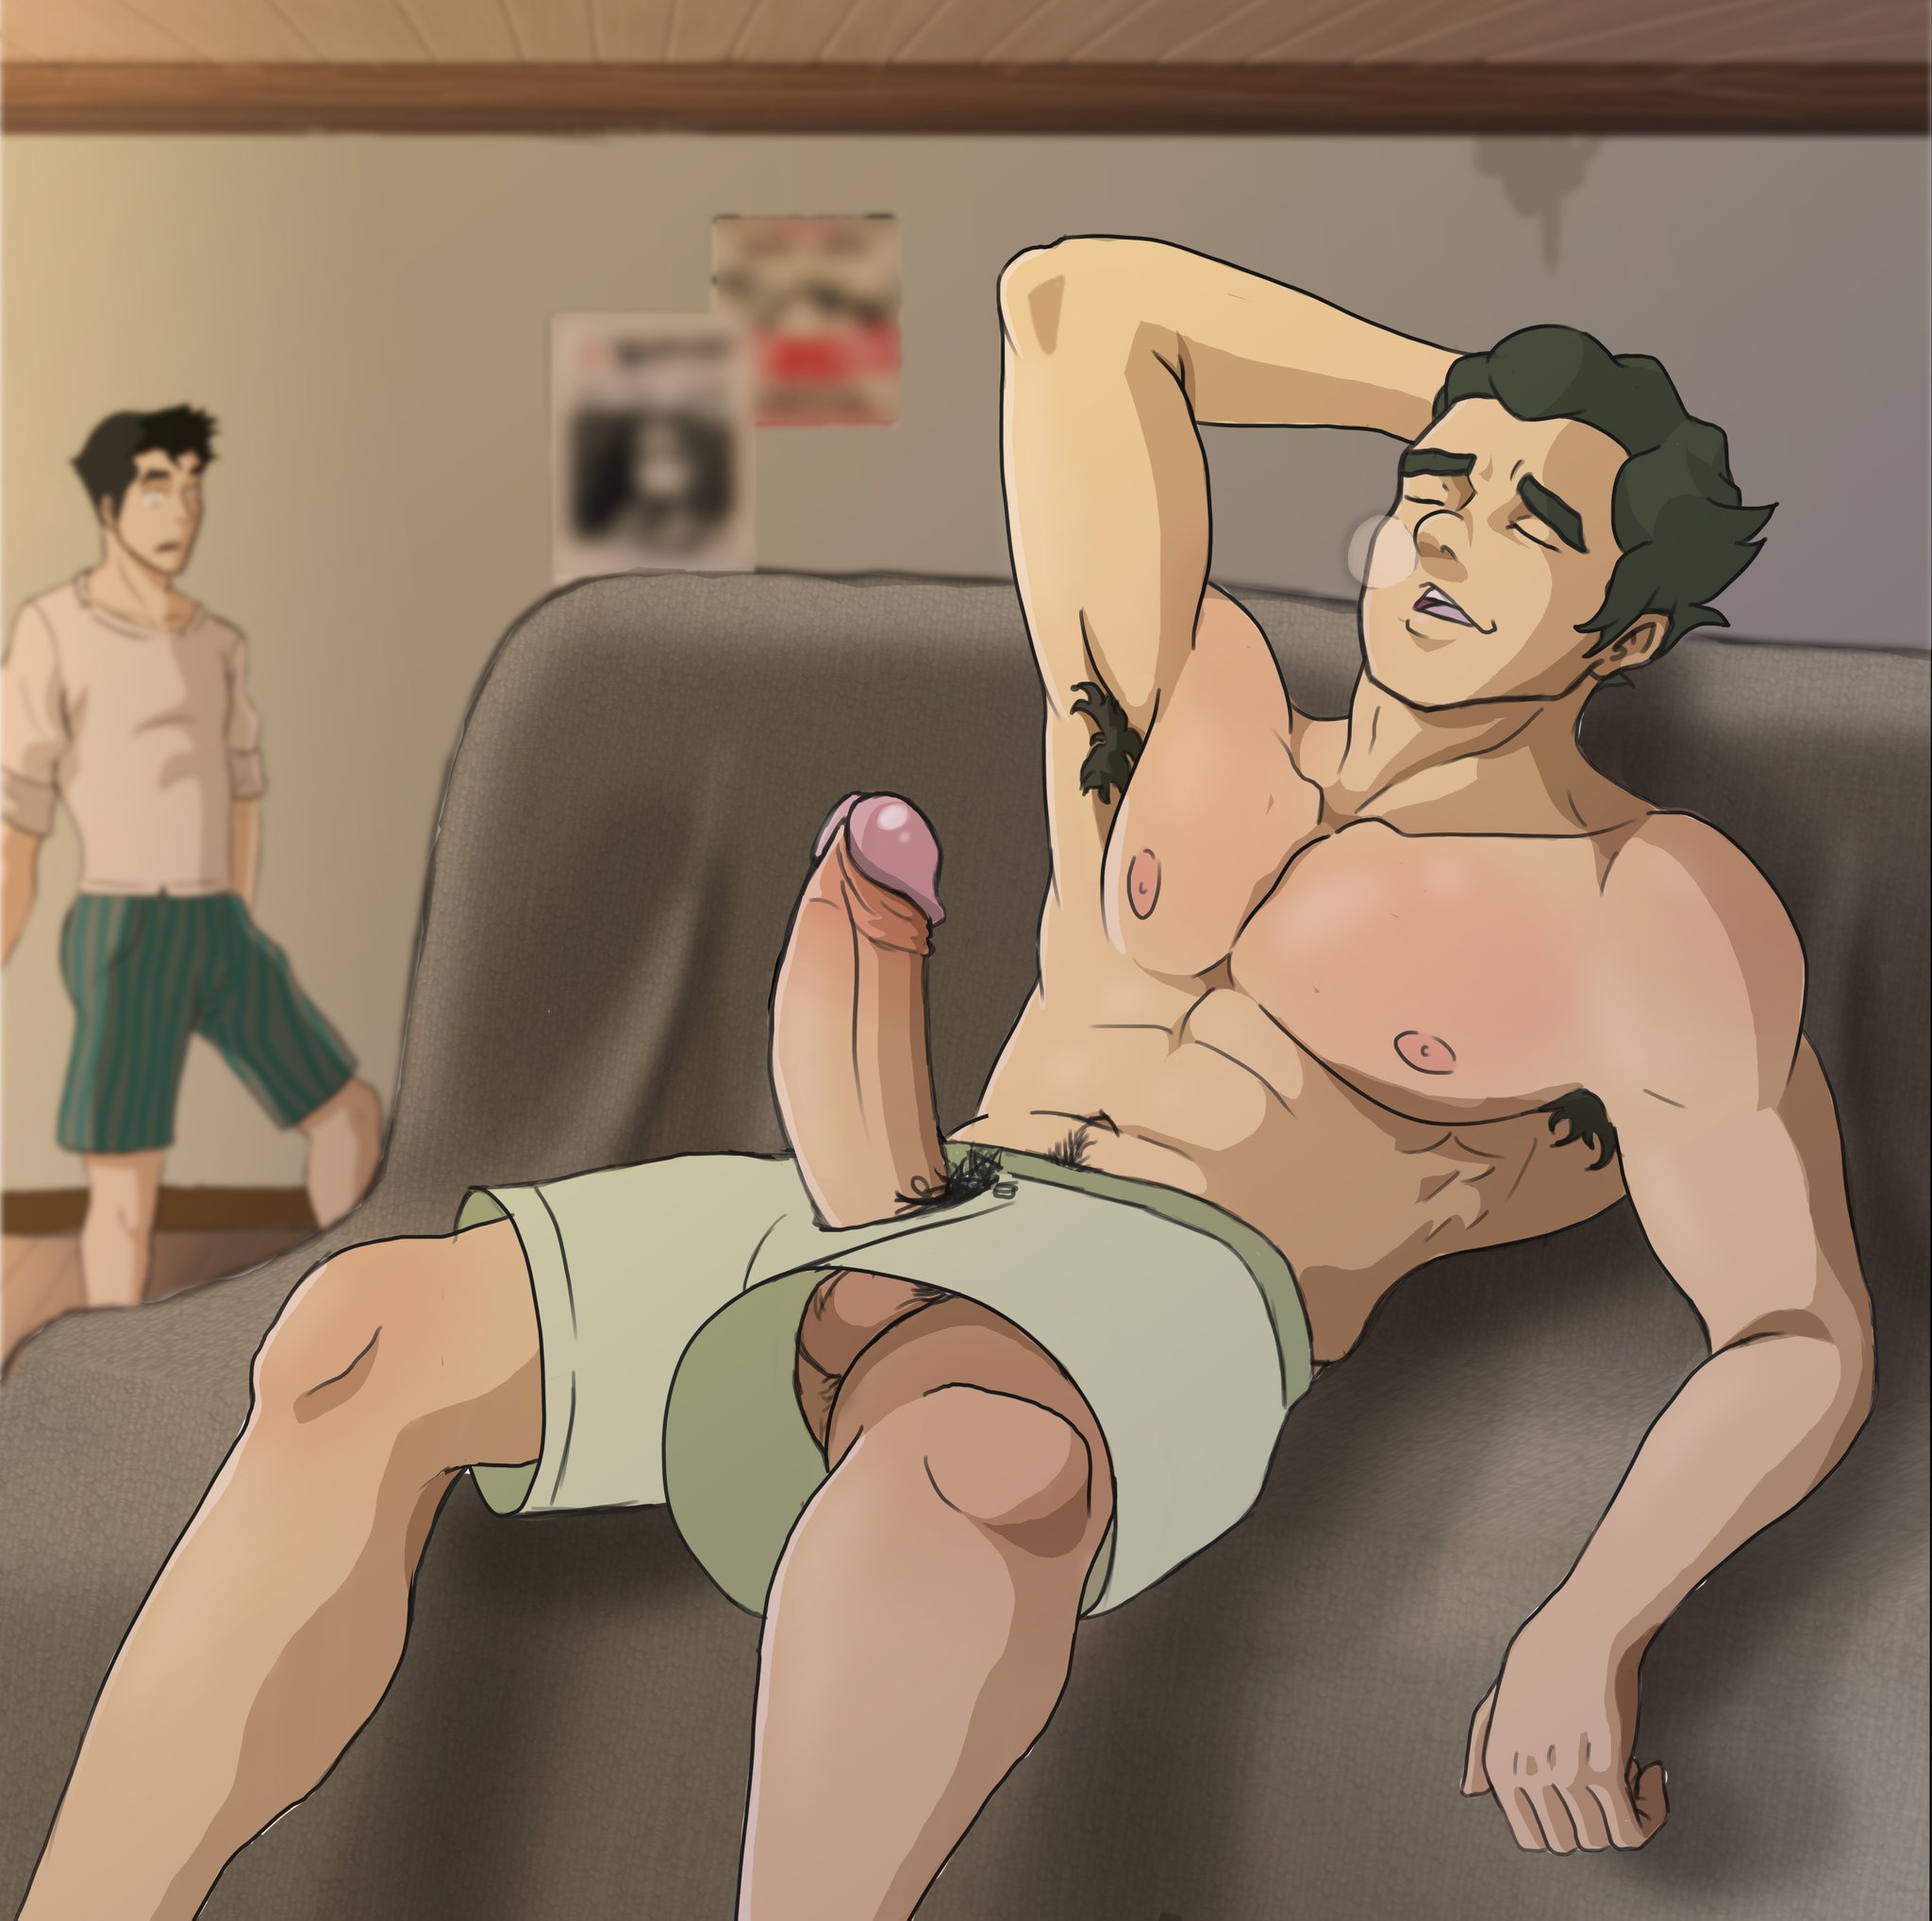 rule34.us Rule34 - If it exists, there is porn of it / bolin, mako / 3.